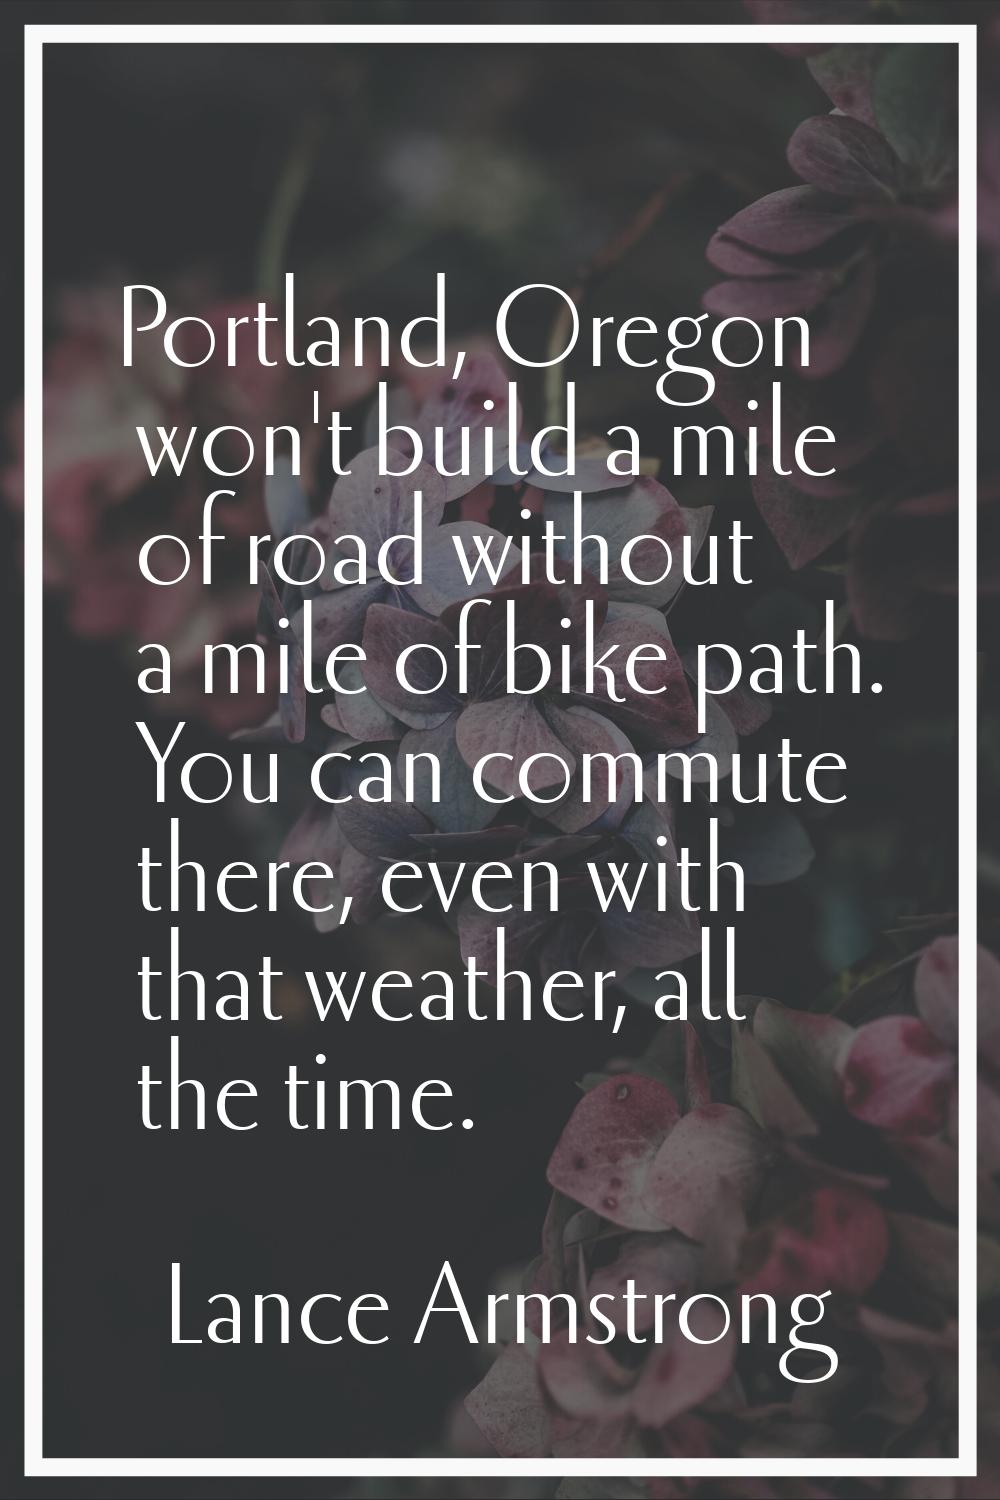 Portland, Oregon won't build a mile of road without a mile of bike path. You can commute there, eve